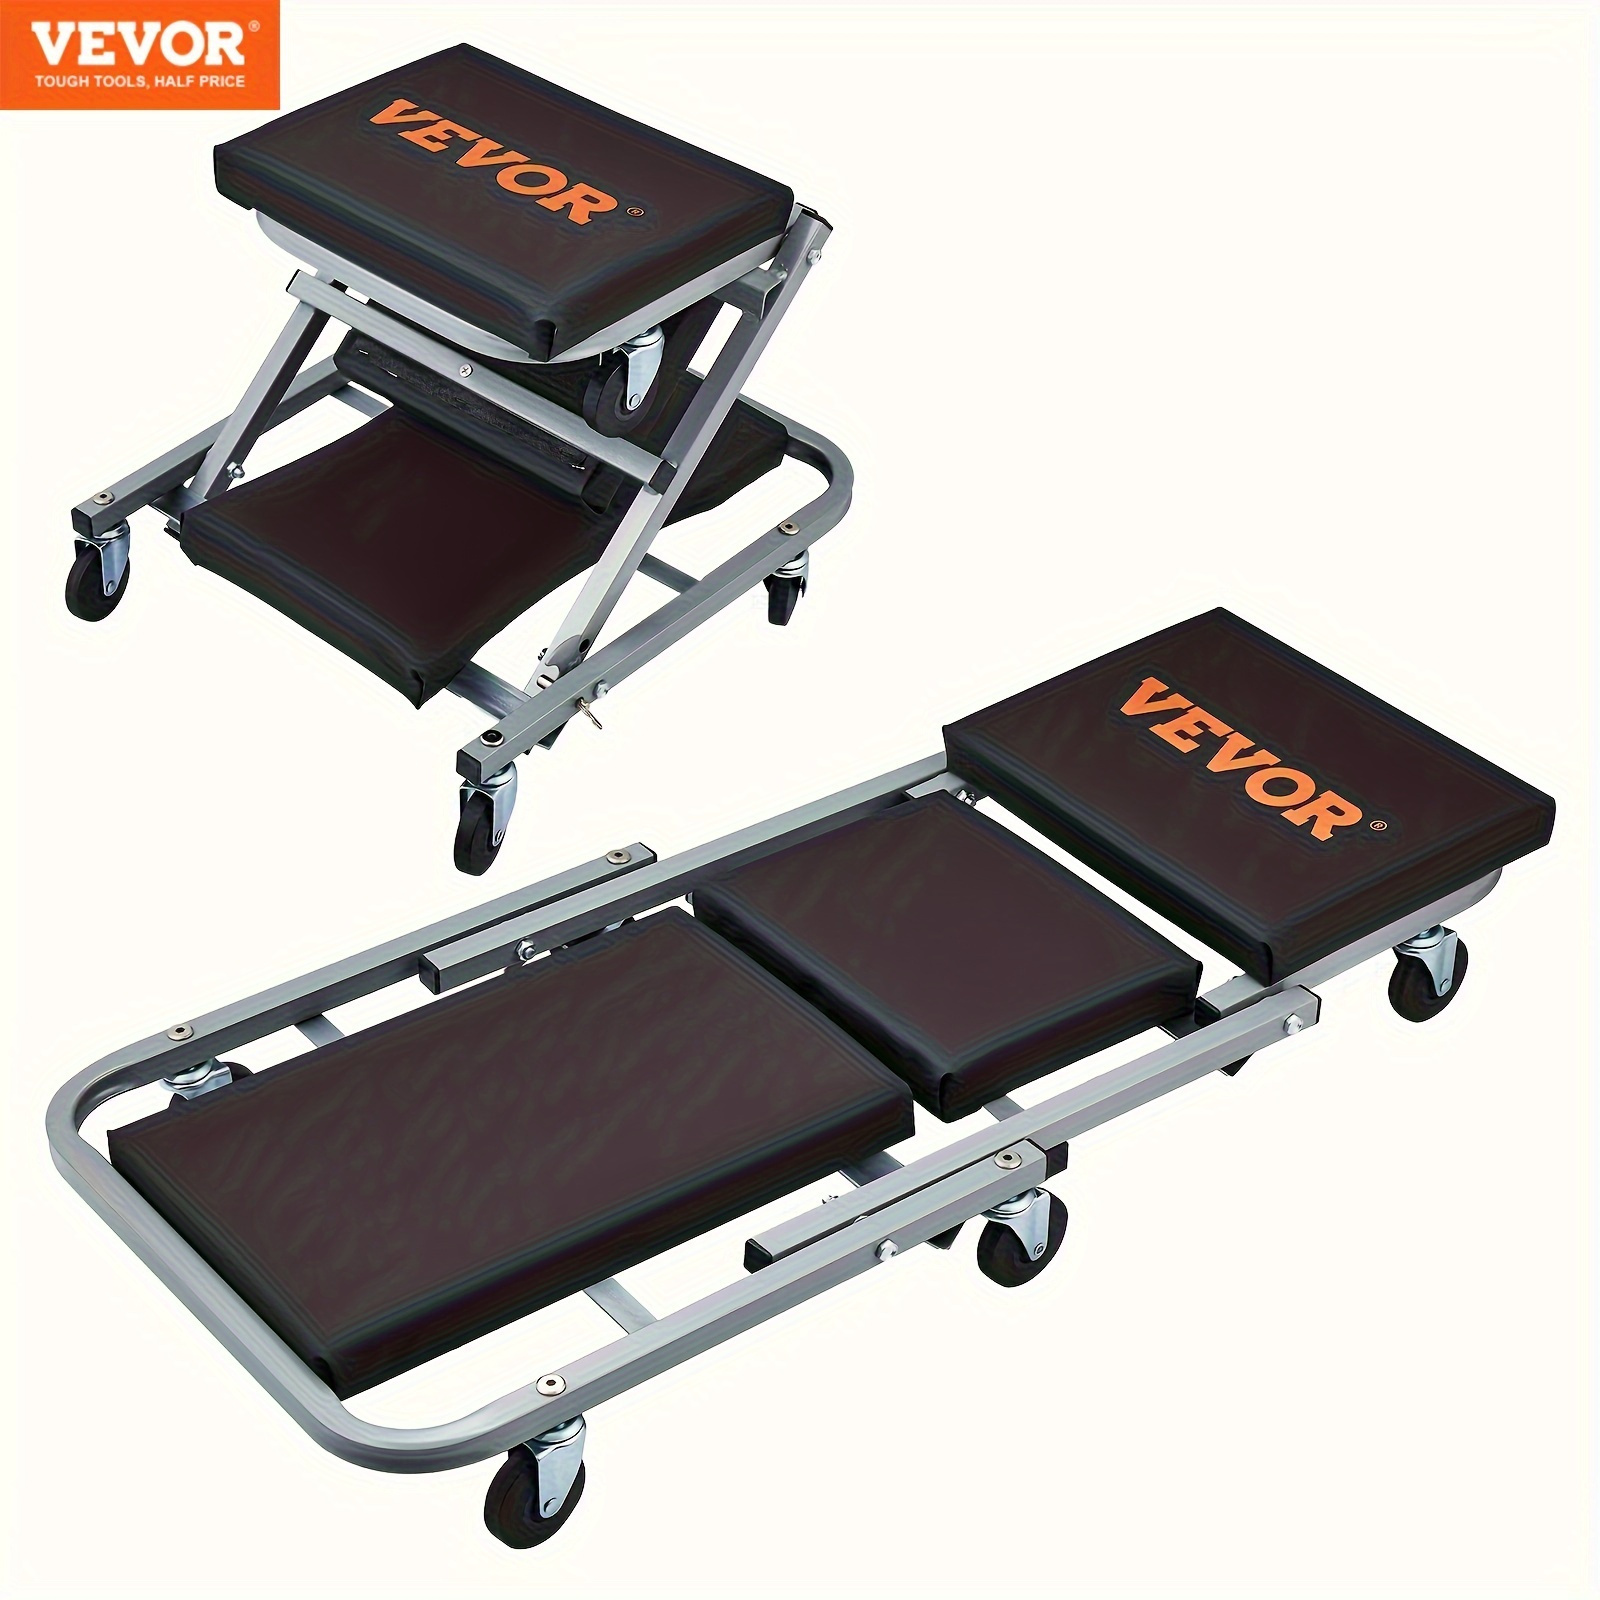 

Vevor 36'' 2 In 1 Z Creeper 300lbs Mechanic Rolling Garage/shop Seat Low Profile Stool For Auto Repair